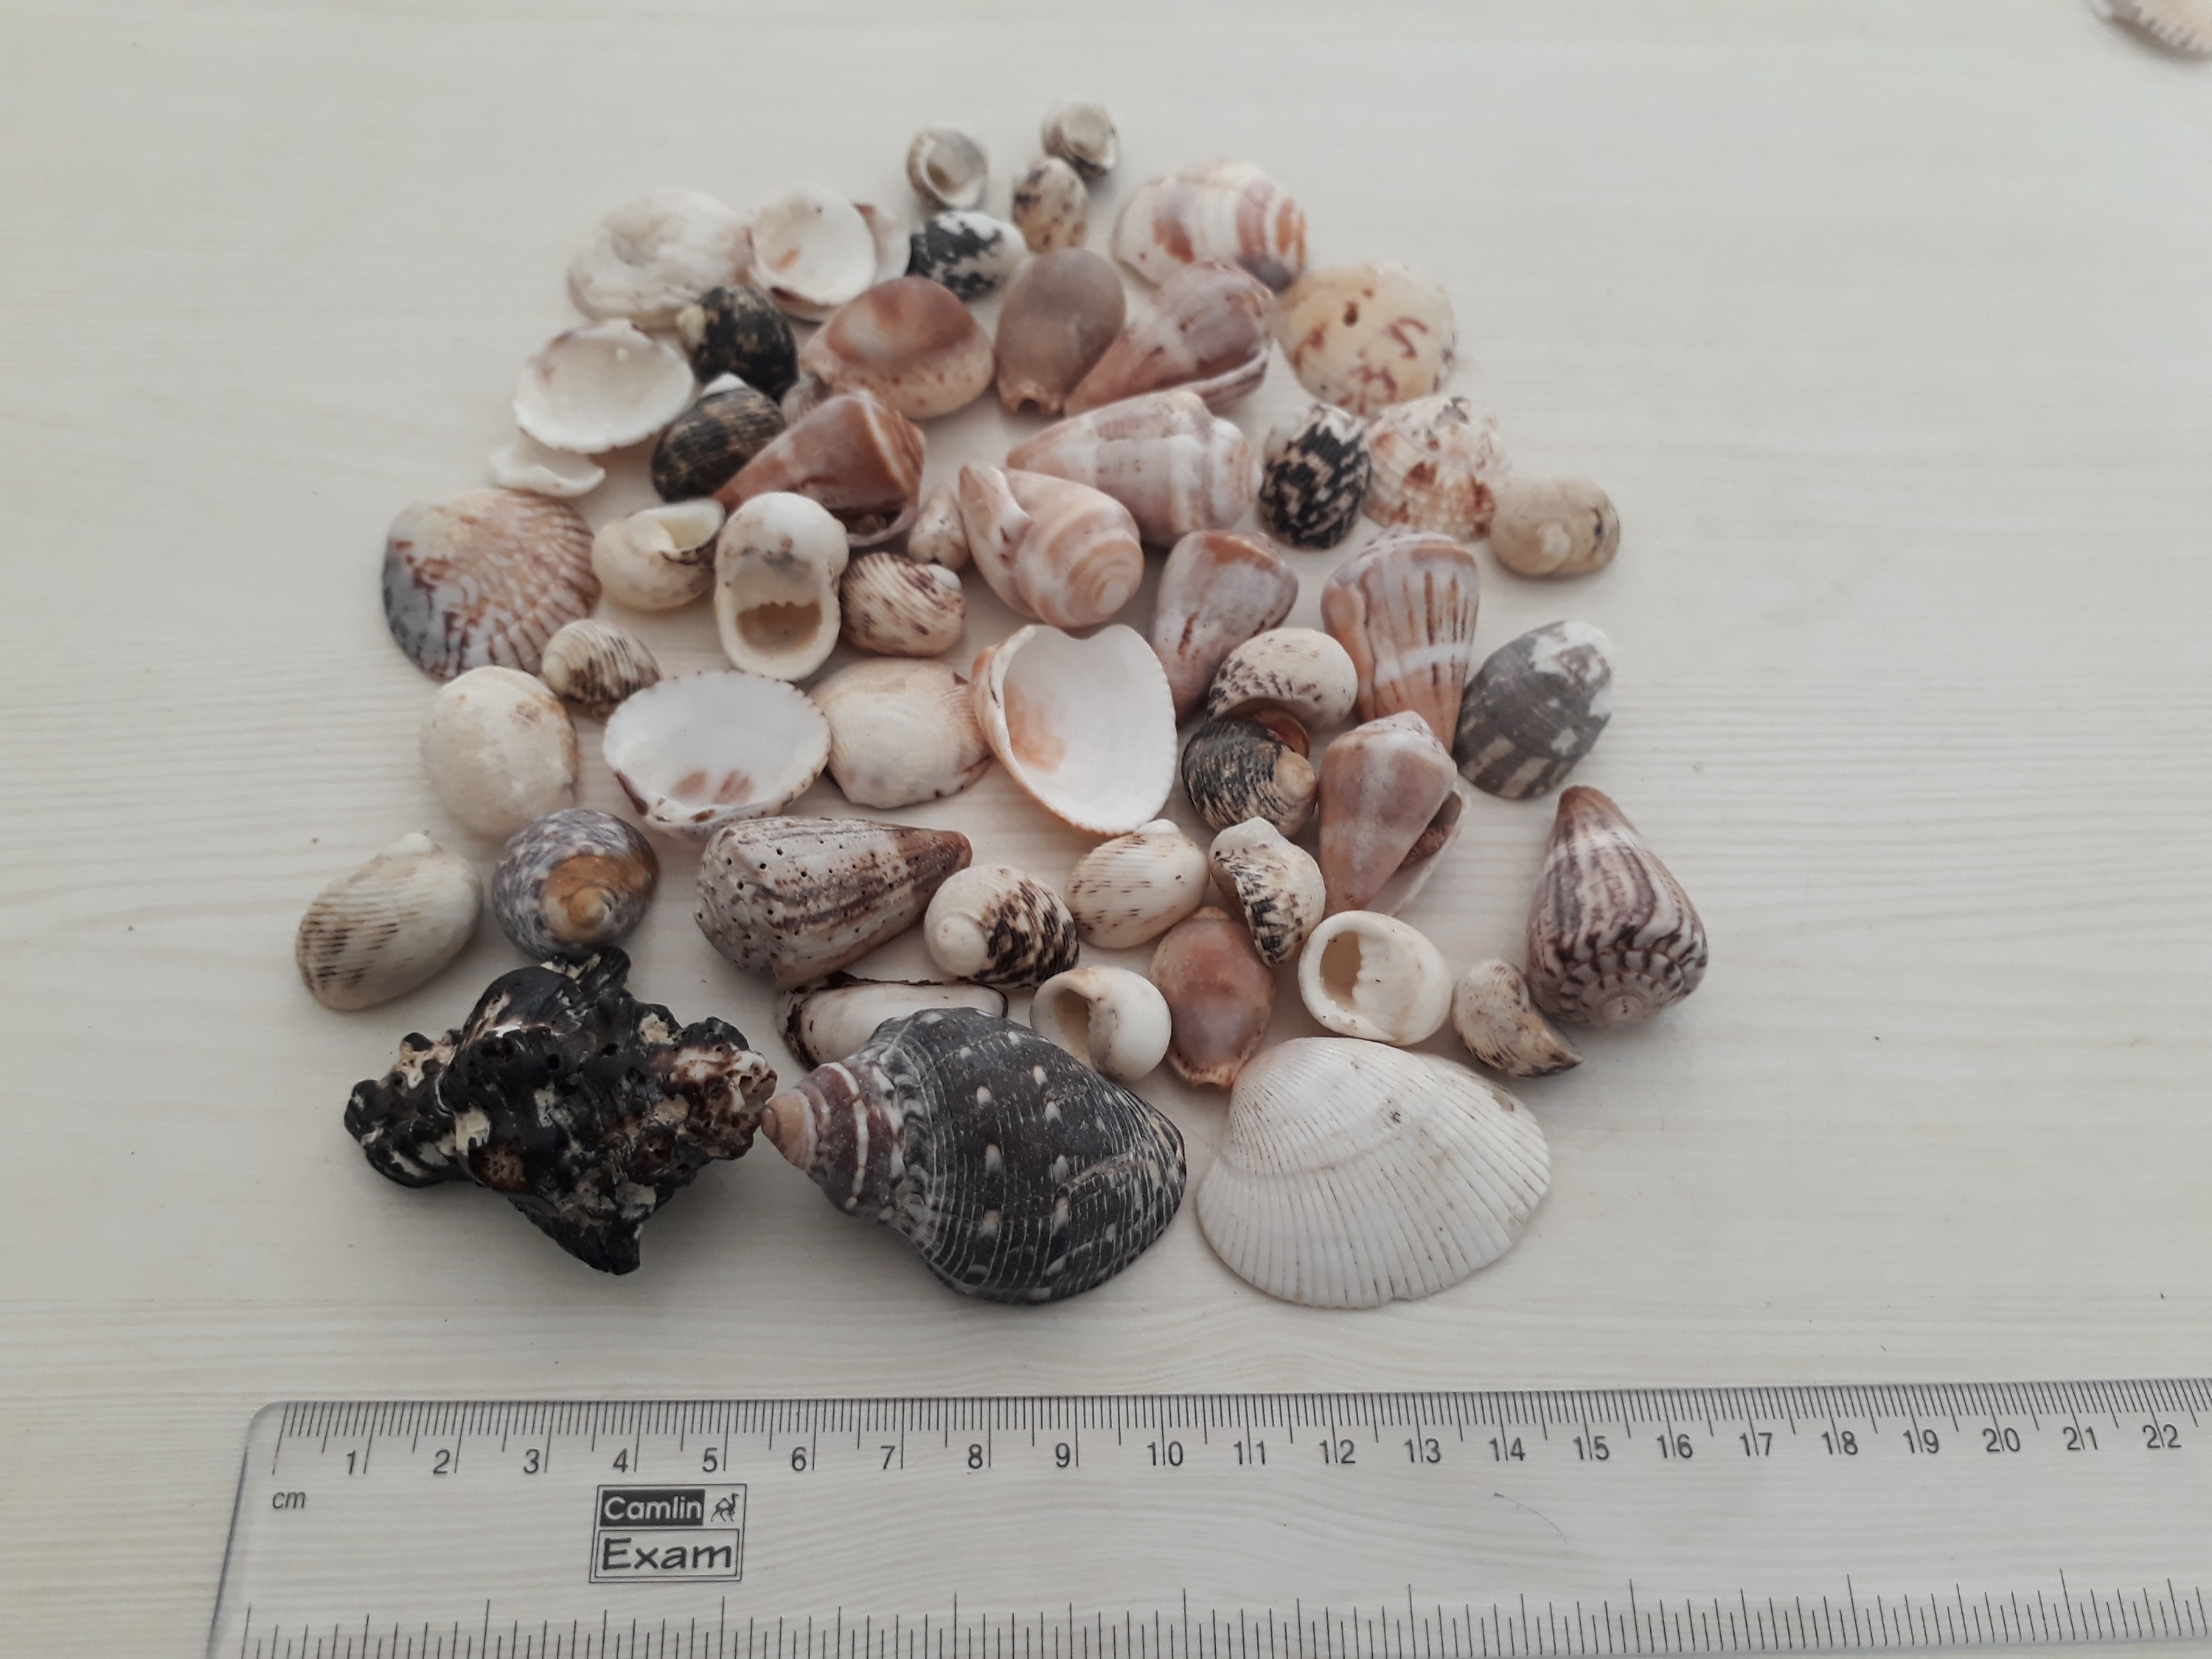 Handicraft and Art Work Special Decor Special Natural Big Size Seashell